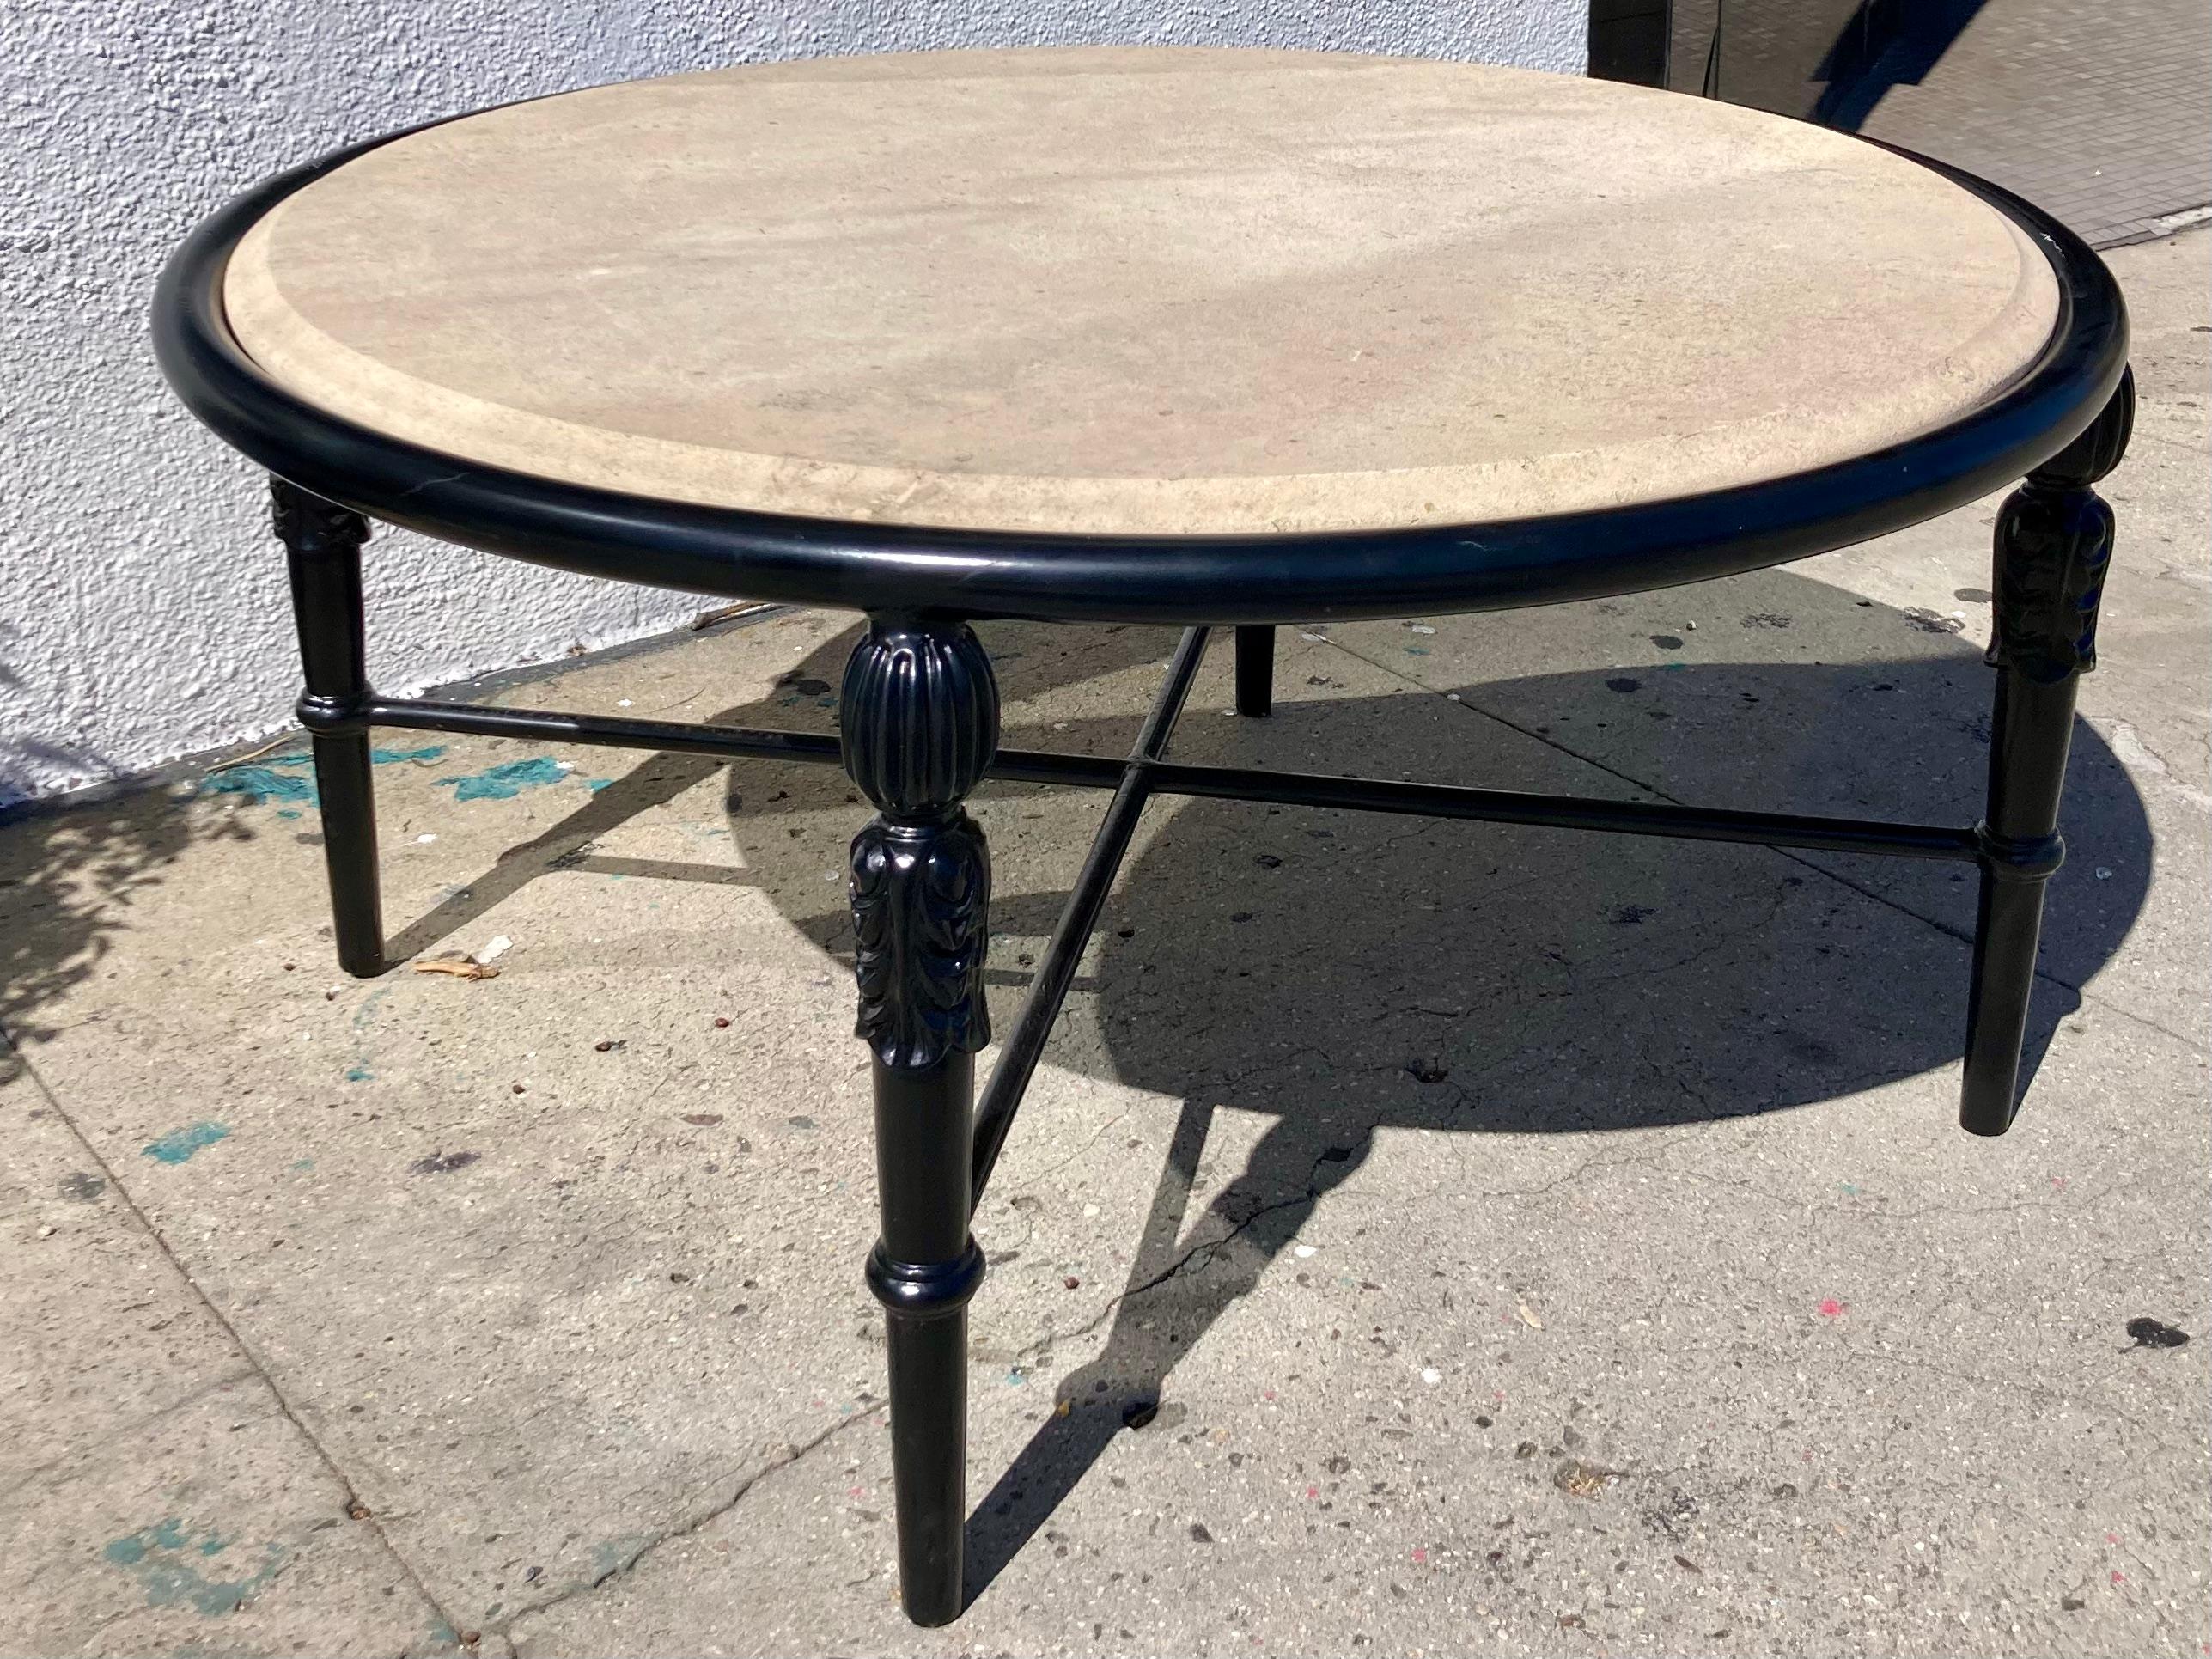 Other Michael Taylor Montecito Round Patio Coffee Table With Stone Top For Sale